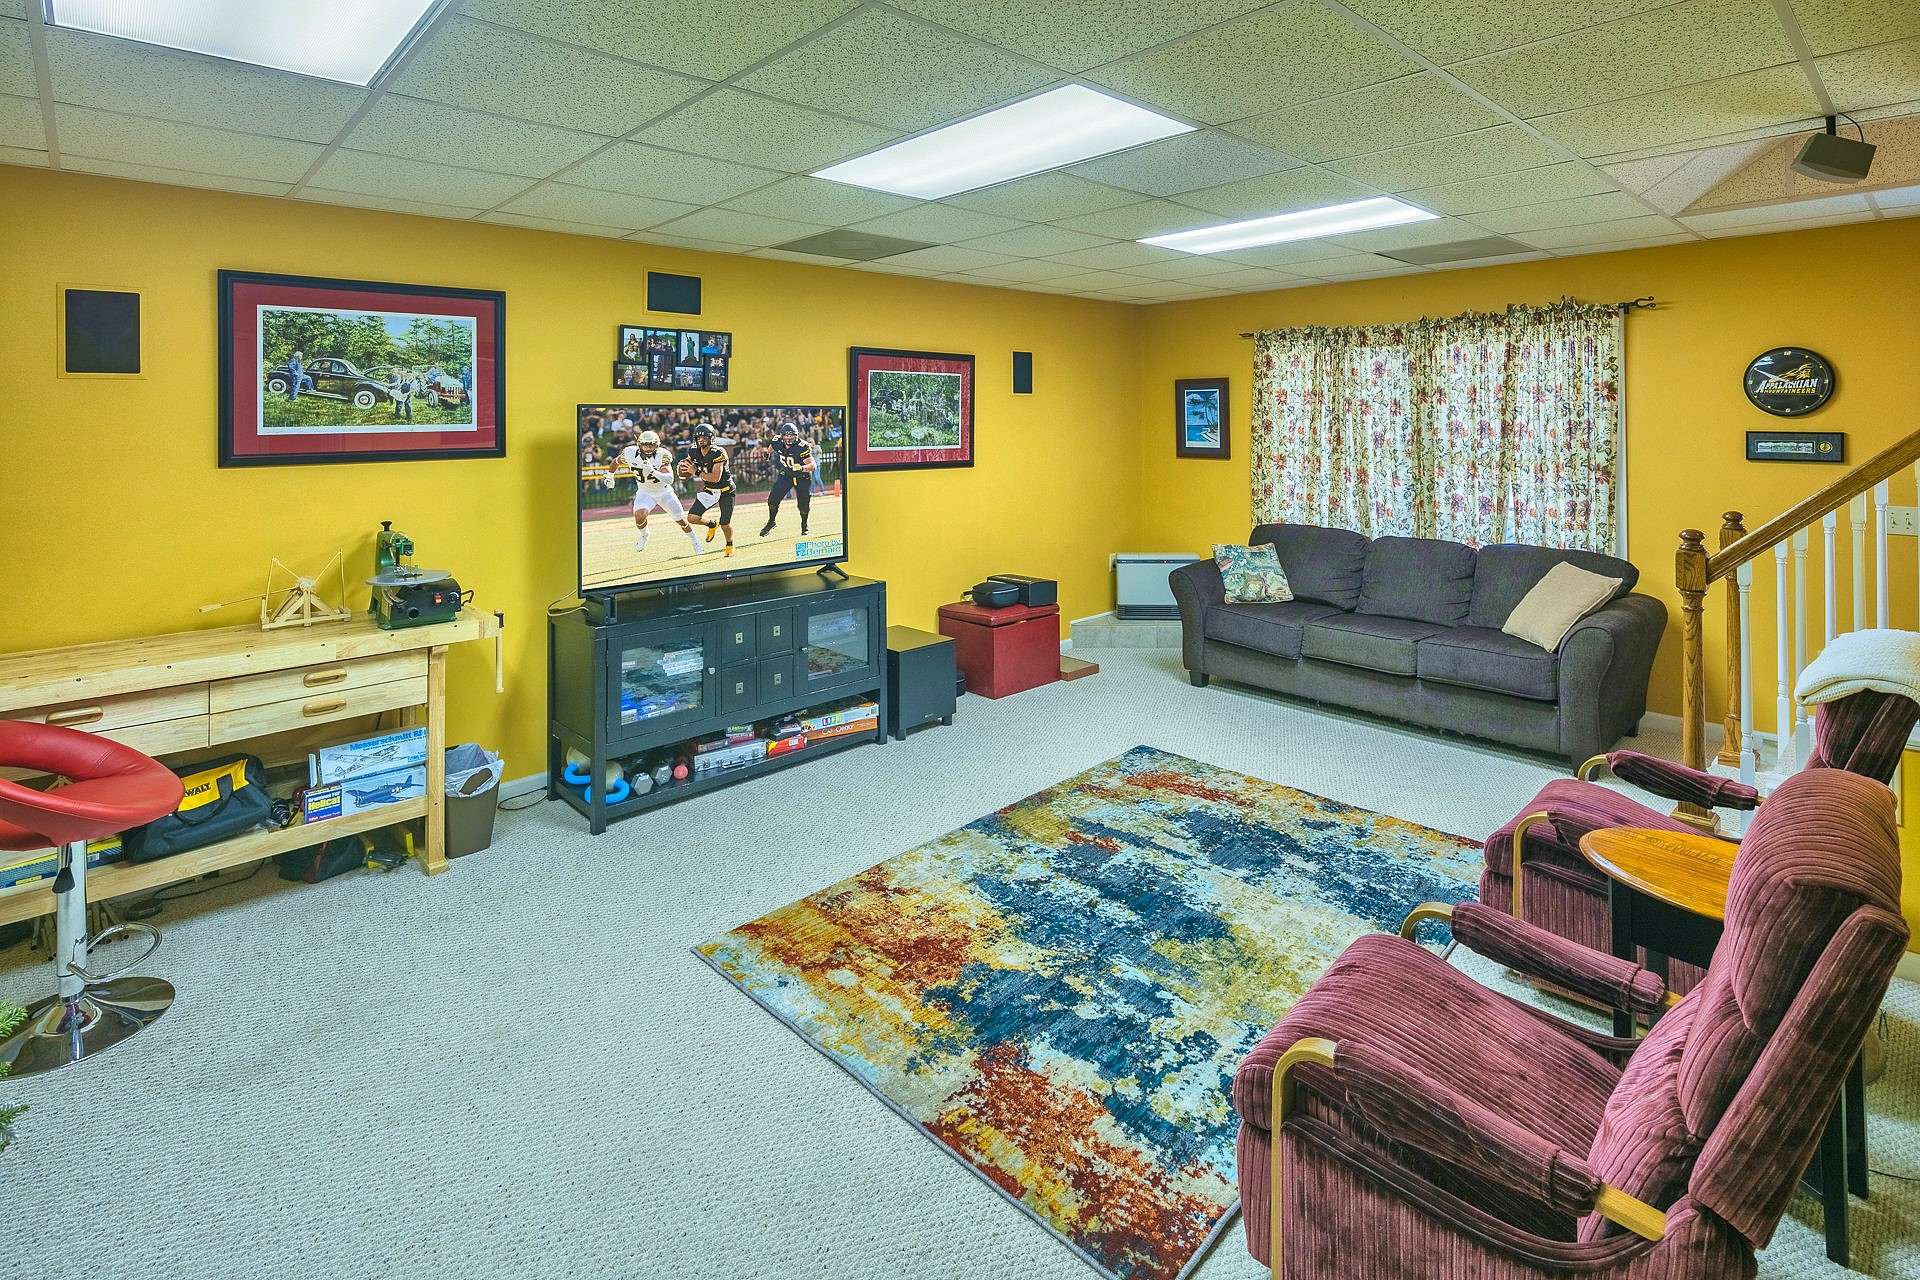 The lower level offers a large area for the den area, game room, or play area.